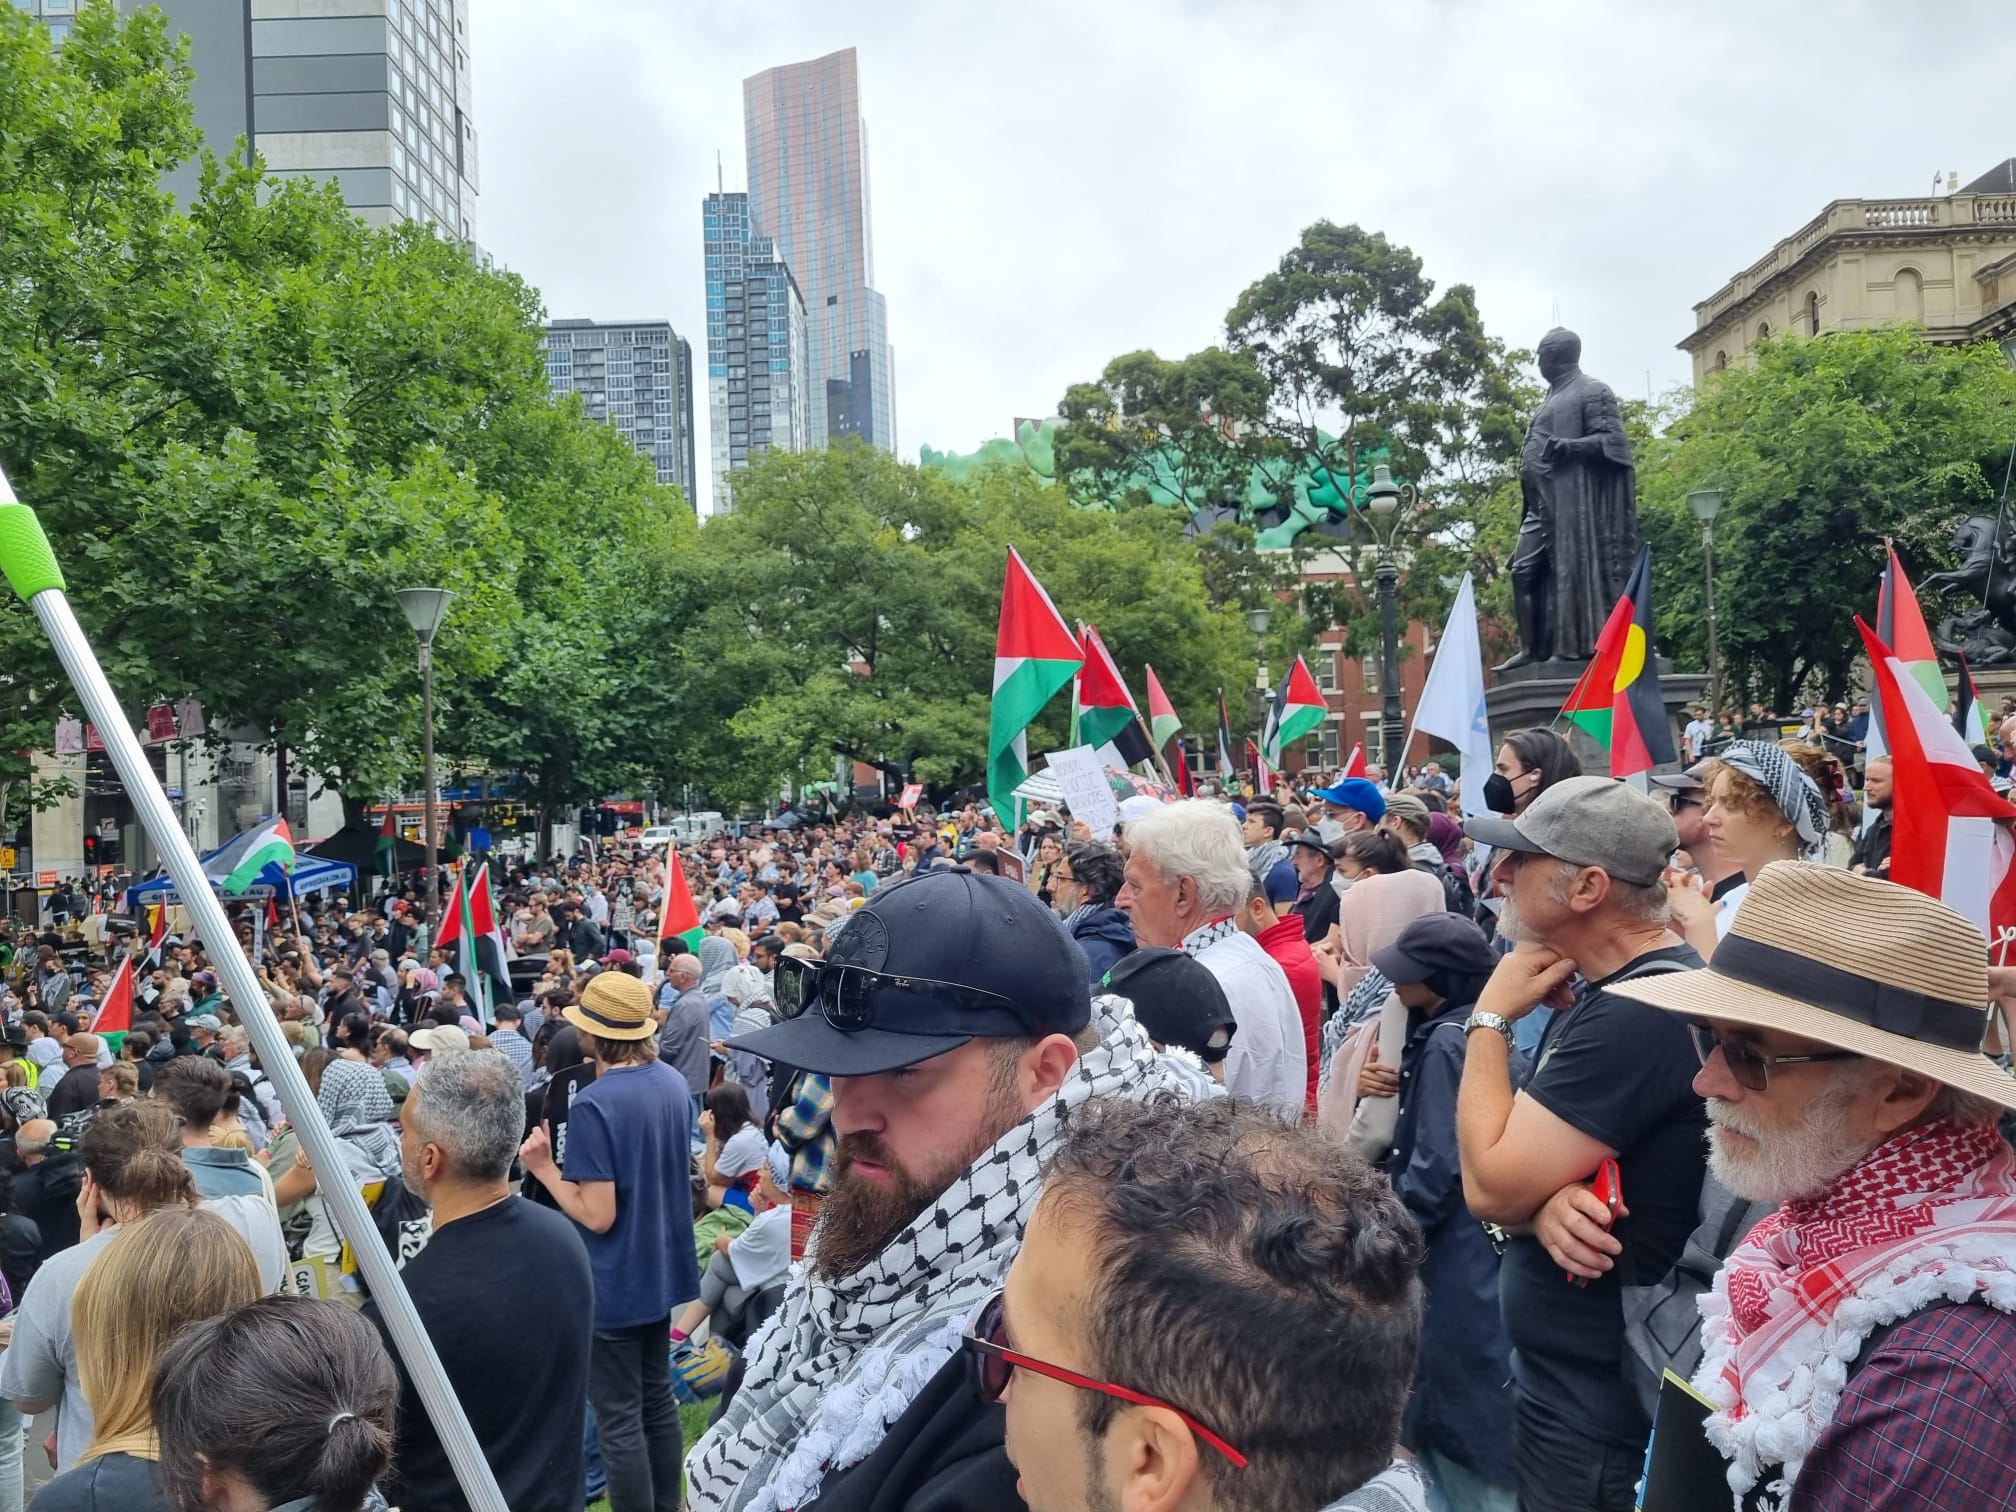 Tens of thousands rally in Naarm/Melbourne to free Palestine